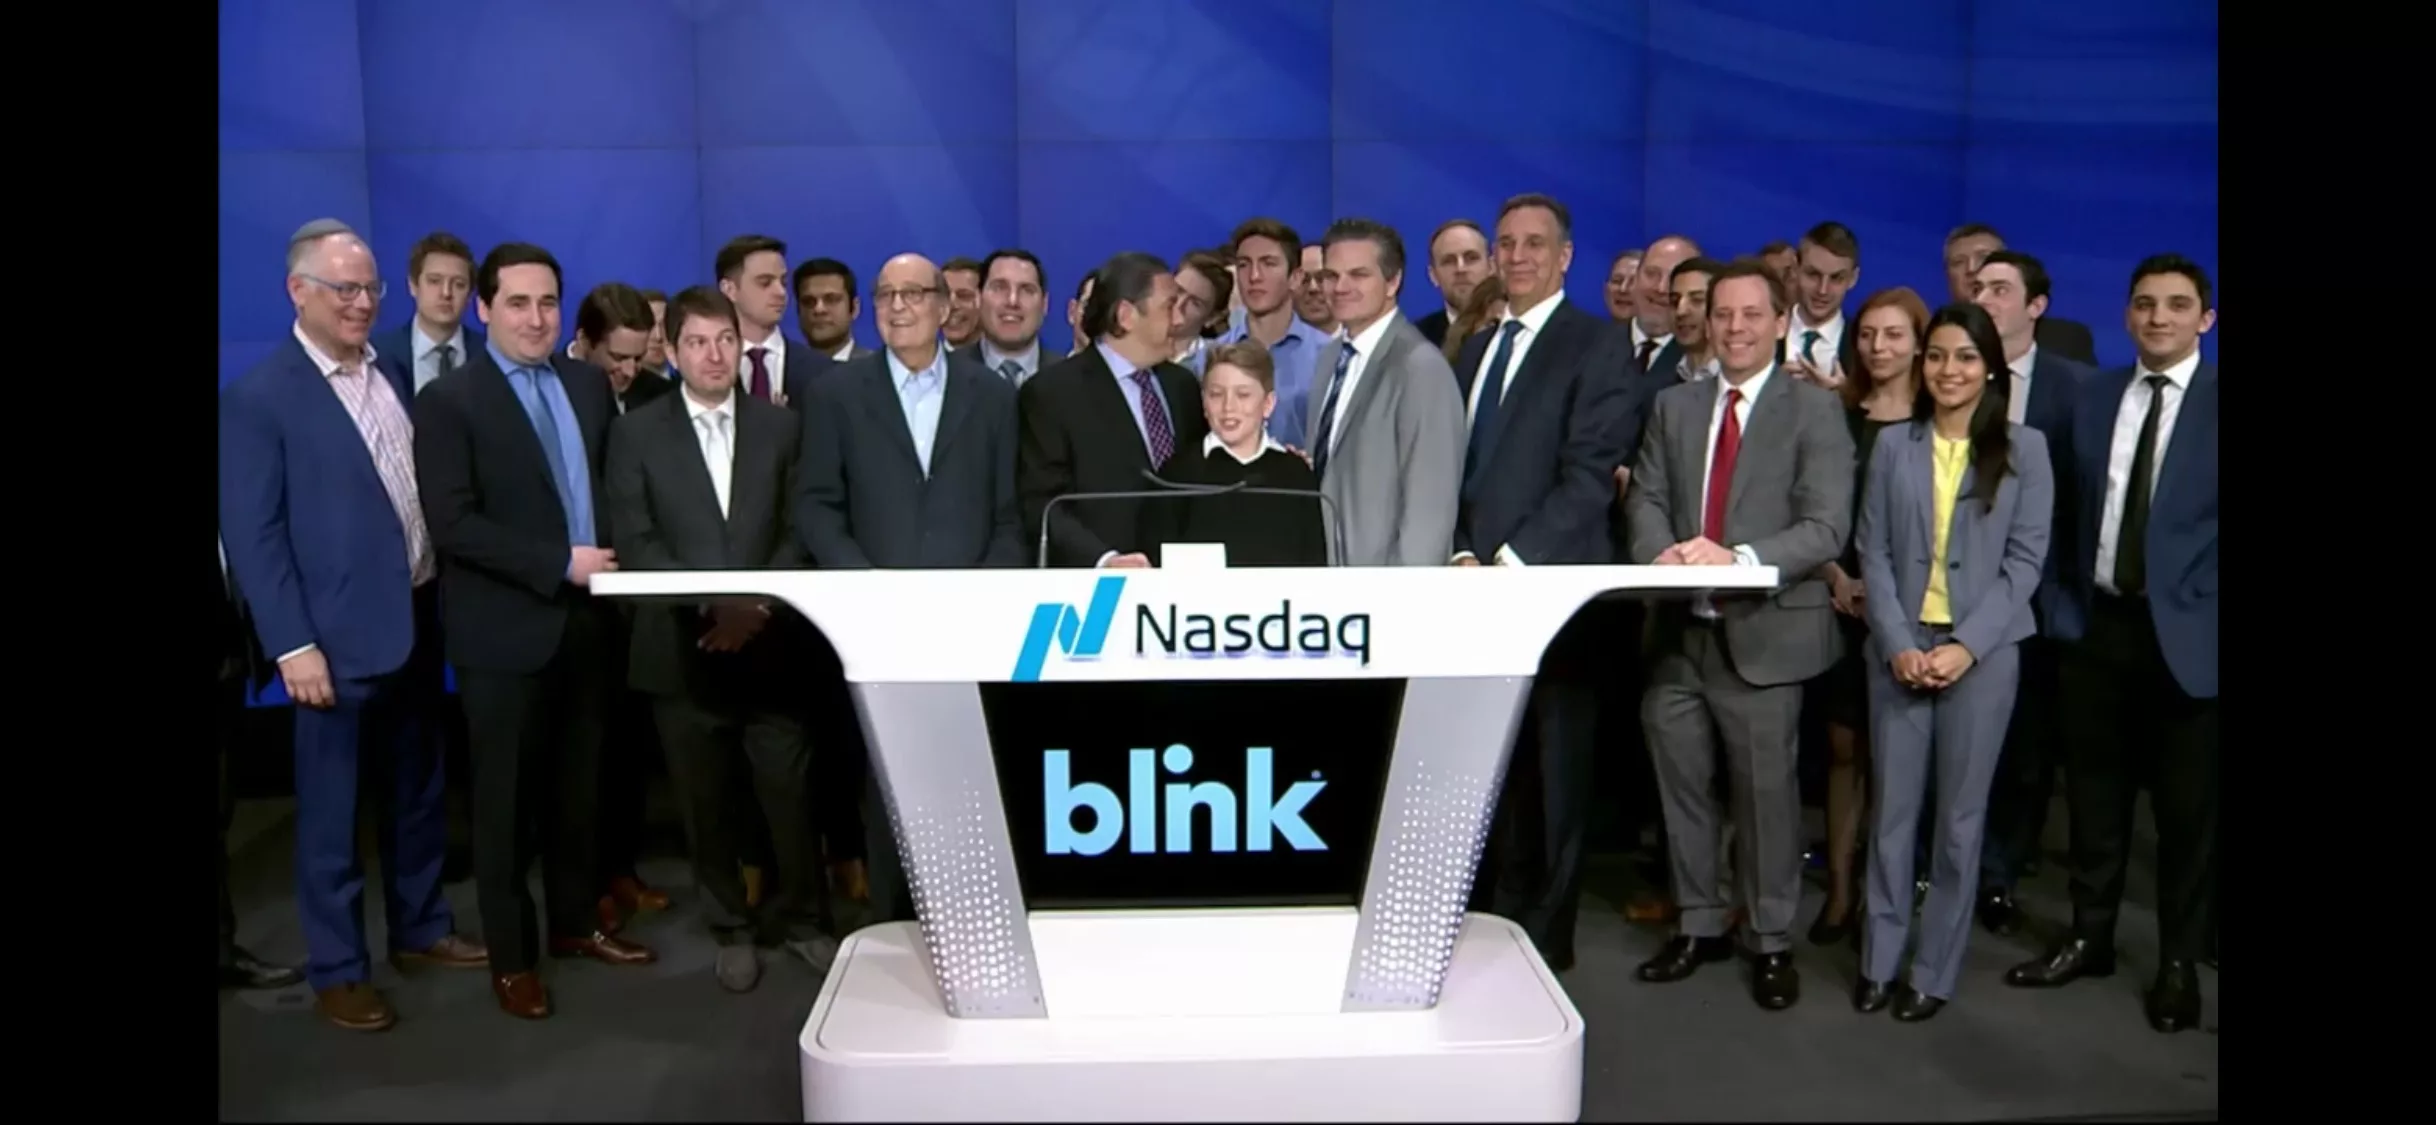 Group of professionals at Nasdaq with Blink logo on podium.